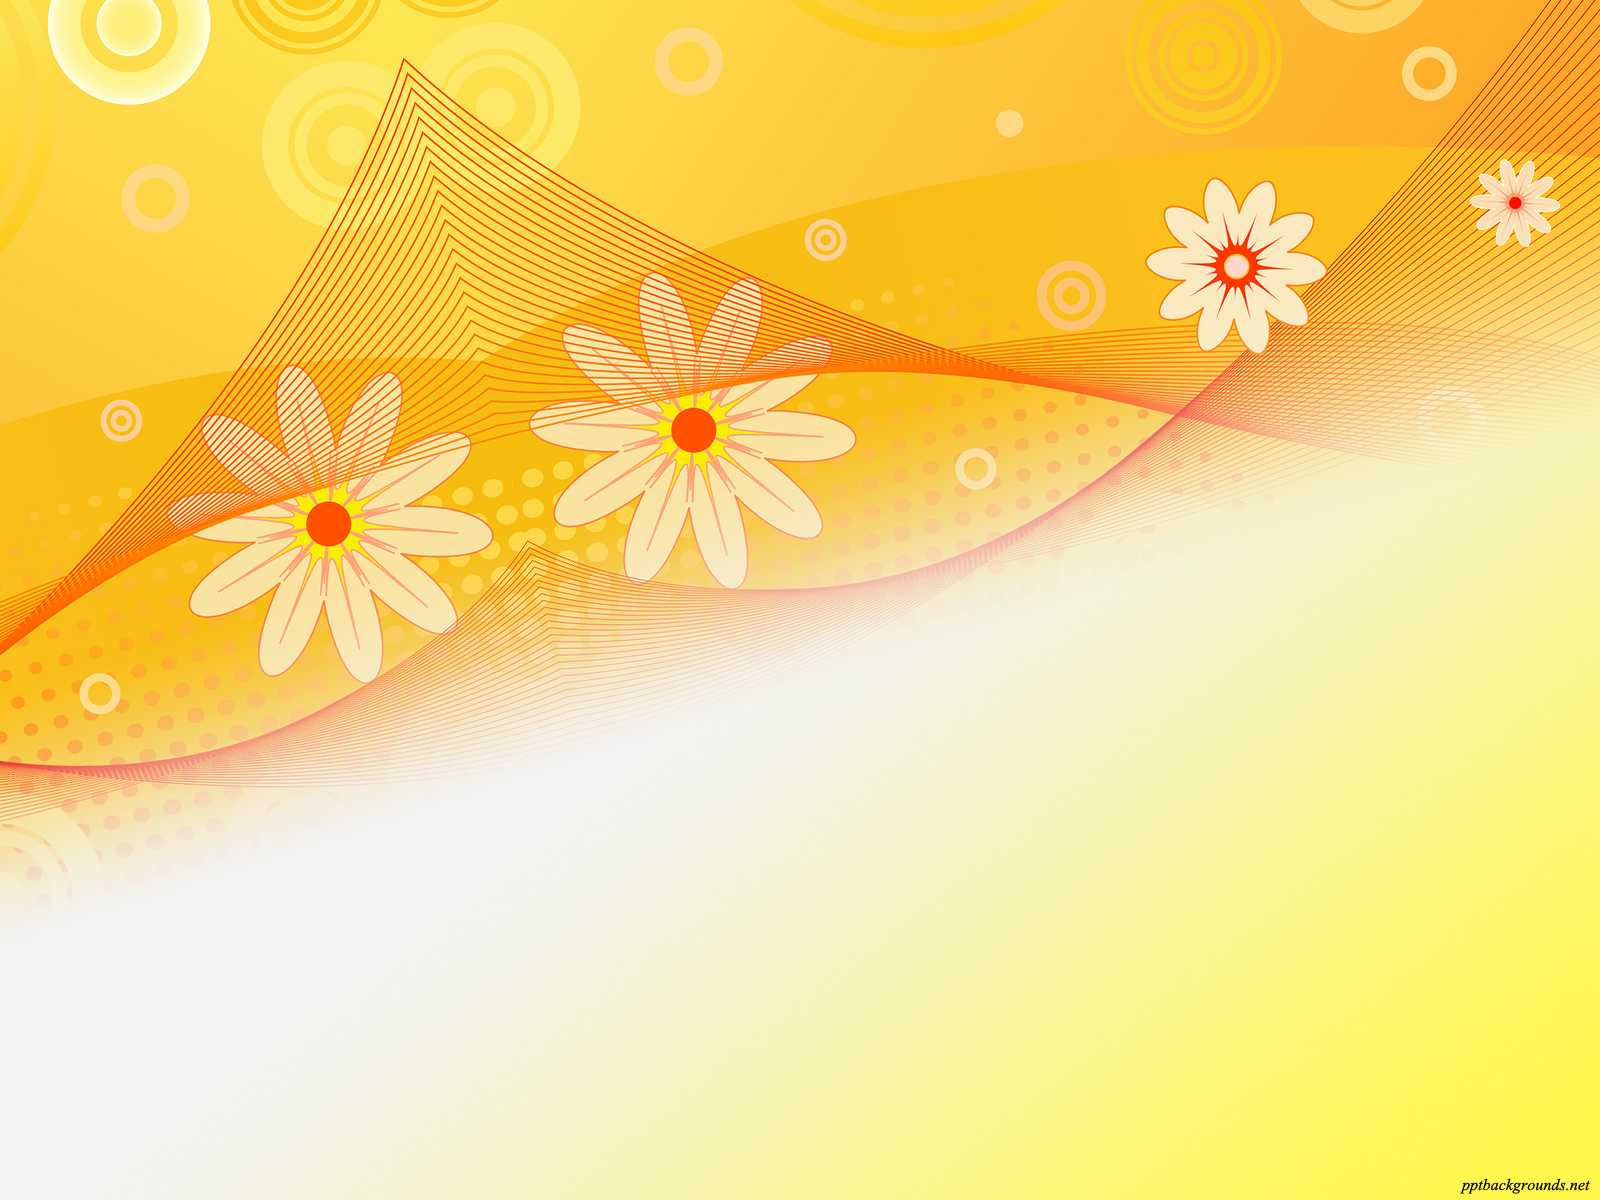 Sunflower Abstract Beauty Backgrounds For Powerpoint Pertaining To Pretty Powerpoint Templates